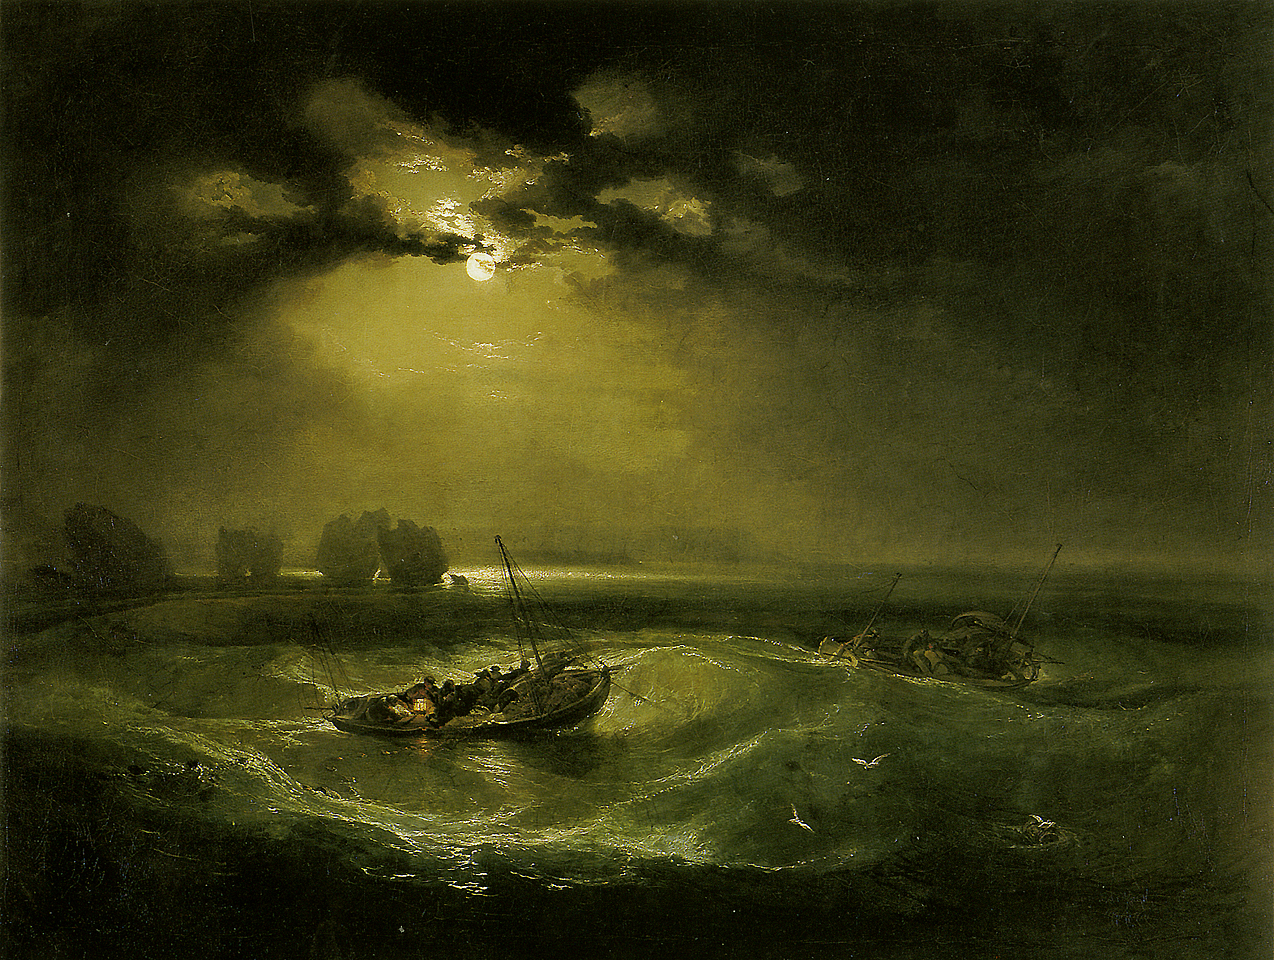 Painting by William Turner, "Fishermen at Sea"; green and sickly lit tossing ocean with fishermen in small boats at foreground and right background. Strange rock shapes at the distant left background.